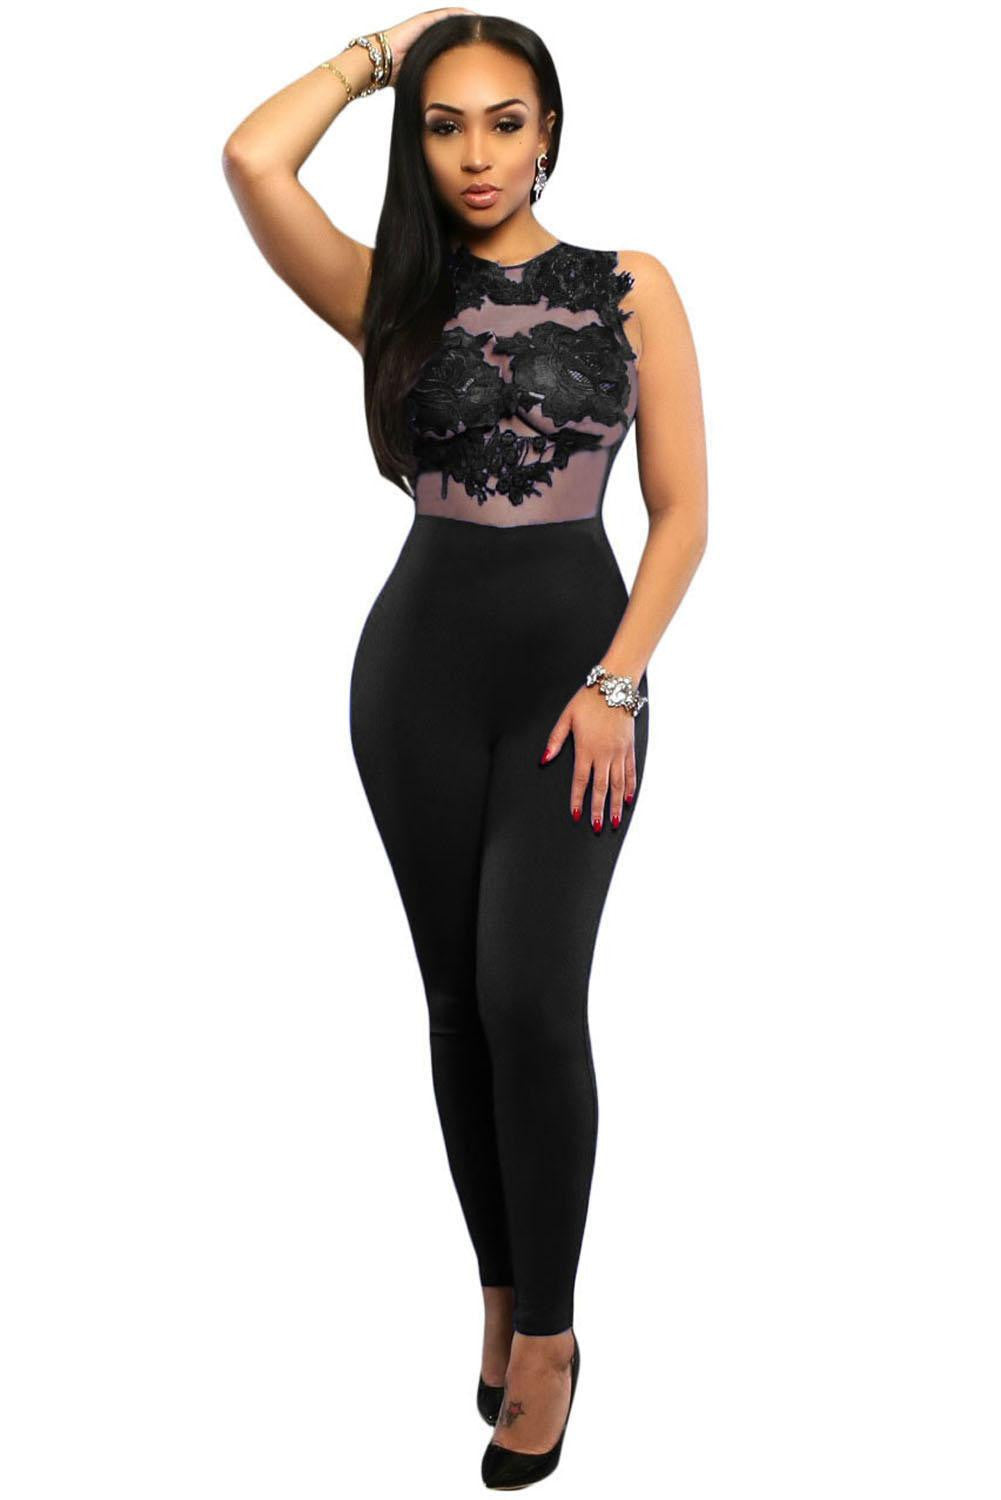 Online discount shop Australia - Dear-Lover Jumpsuits Women Long Pants Casual Black Lace Leather Splice Flare Open Back Party Sexy Club Rompers Macacao LC64037